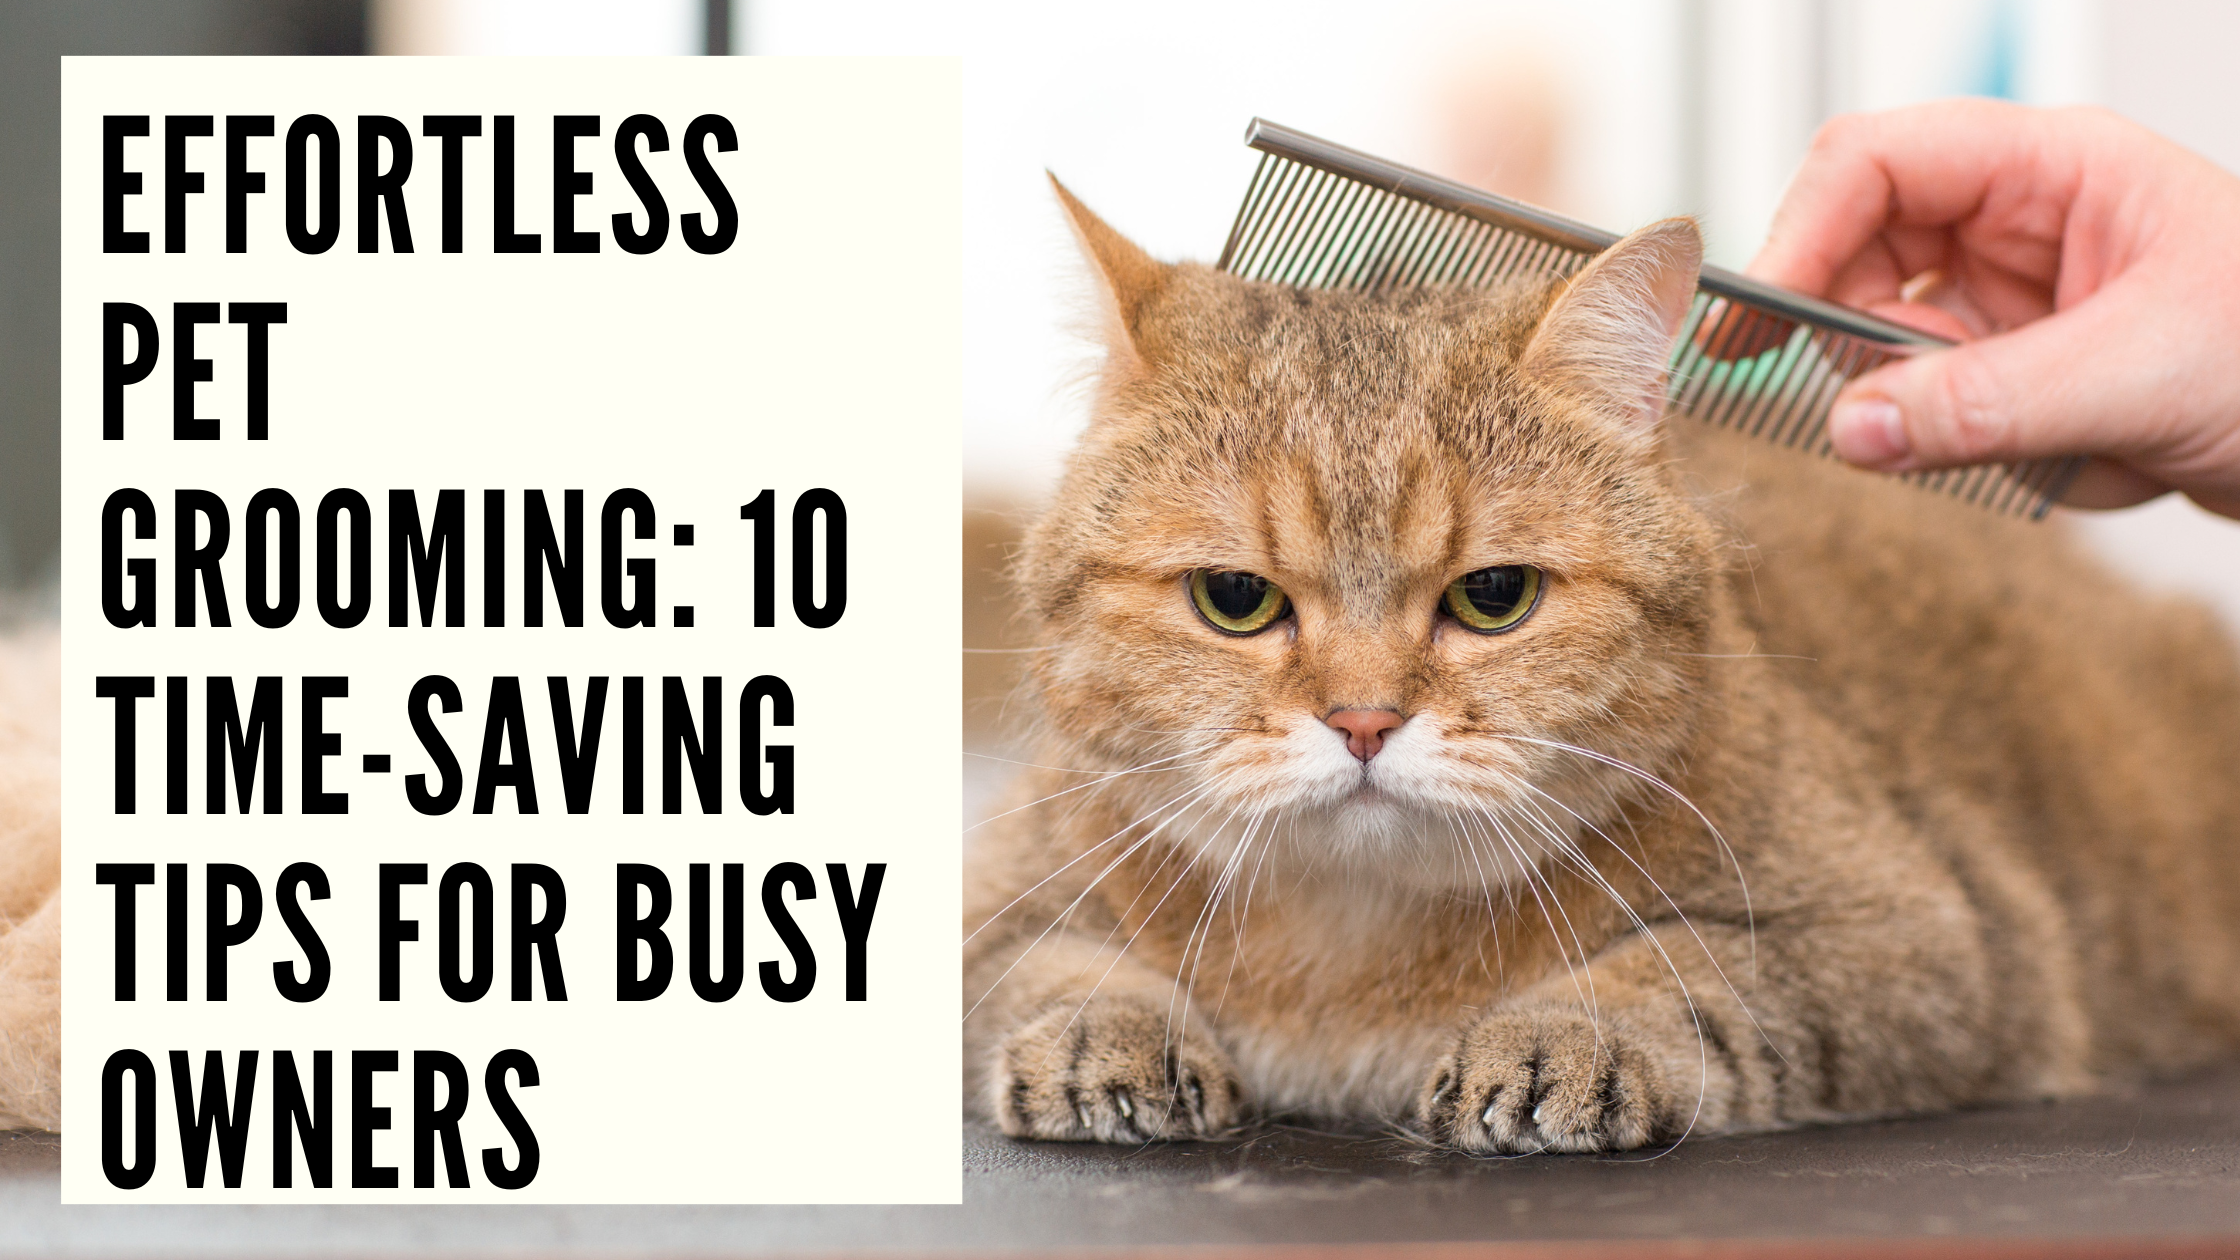 Effortless Pet Grooming 10 Time-Saving Tips for Busy Owners